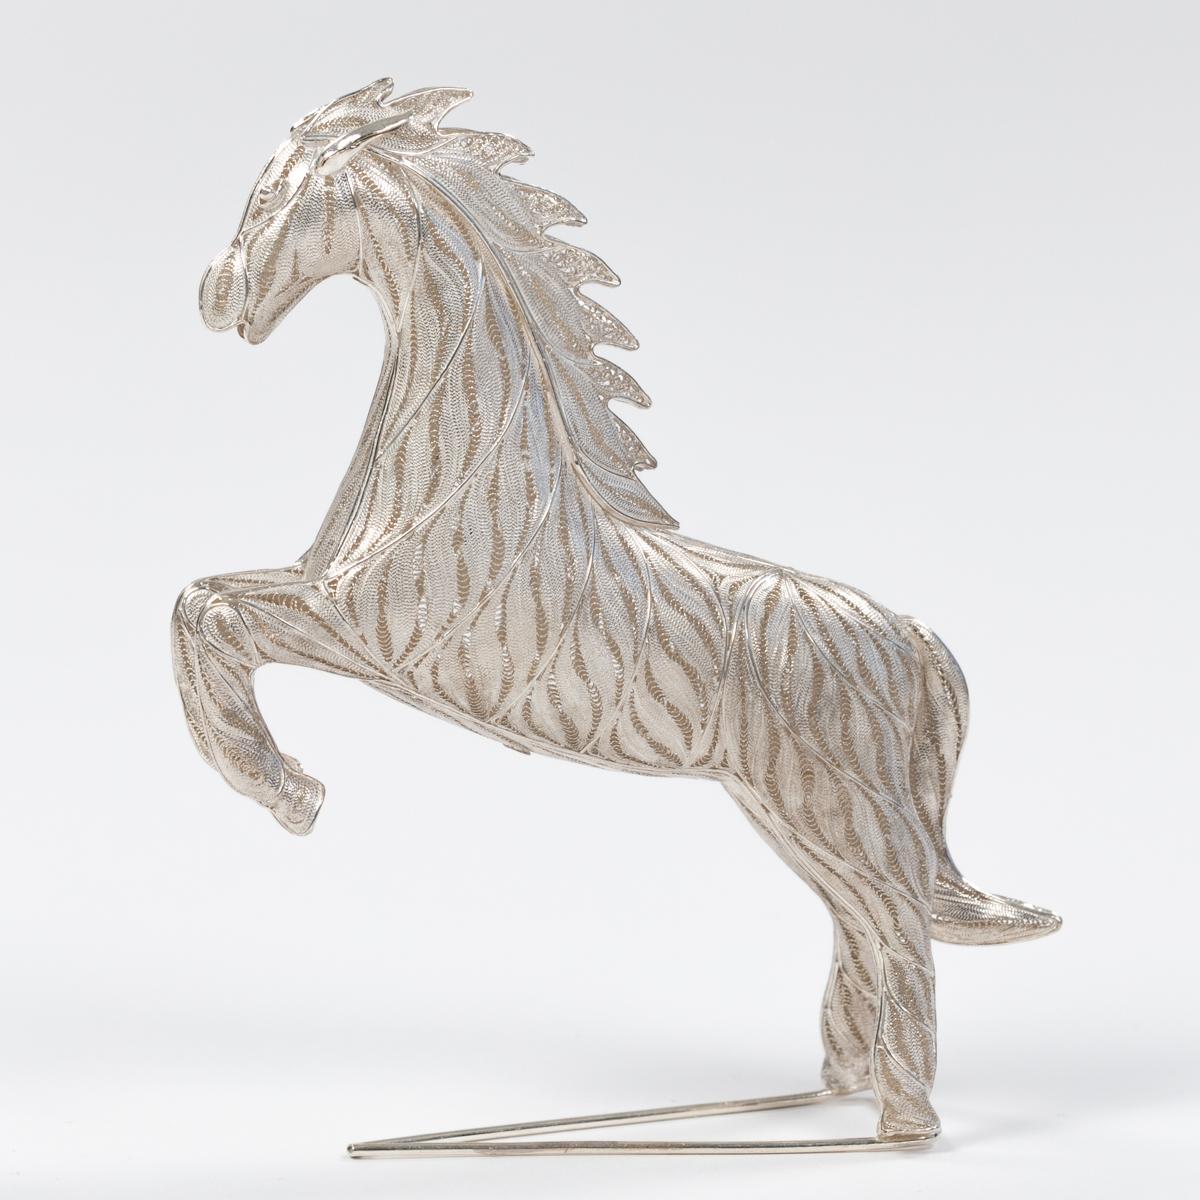 Contemporary Jumping Horse Sculpture 925 Silver Handcrafted Filigree Technique Germany 2005 For Sale